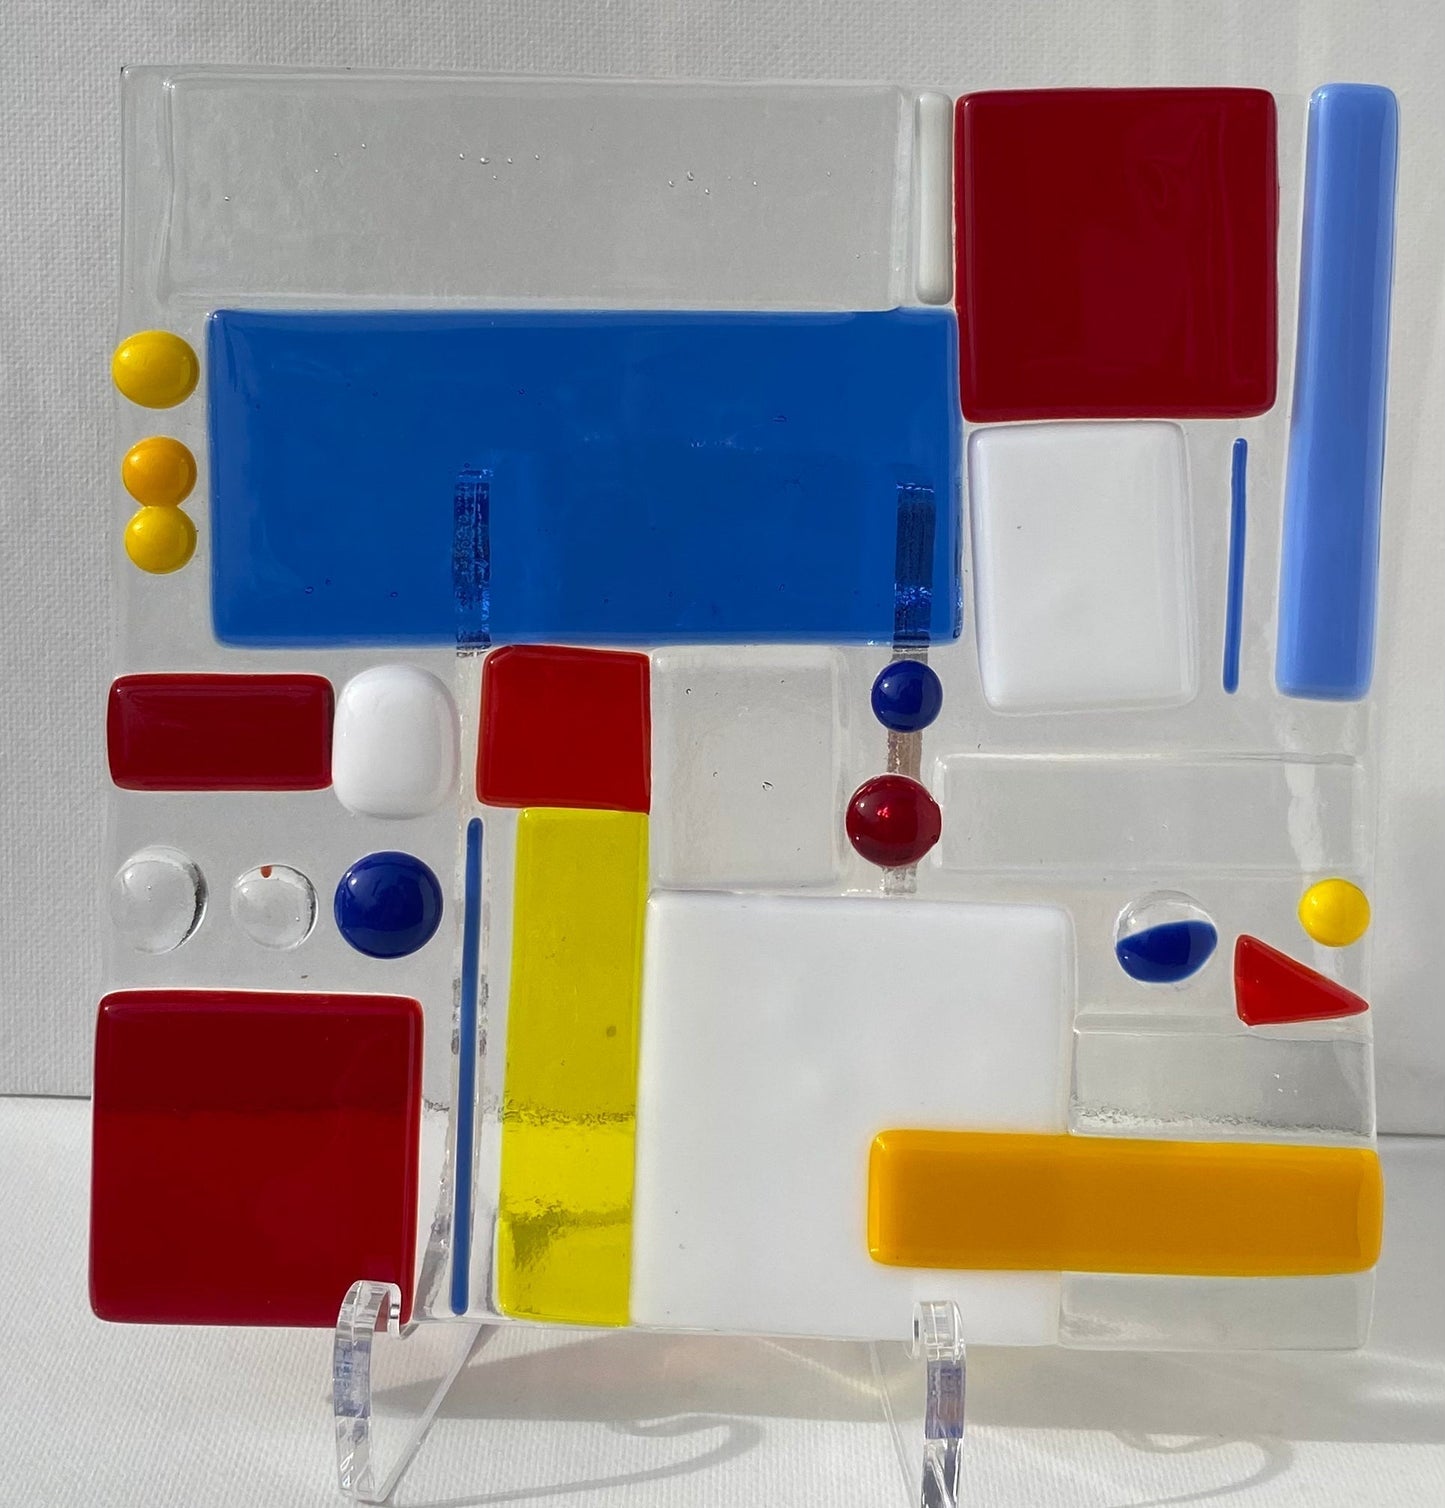 6" plate Fused glass, May 23, 2-4:00